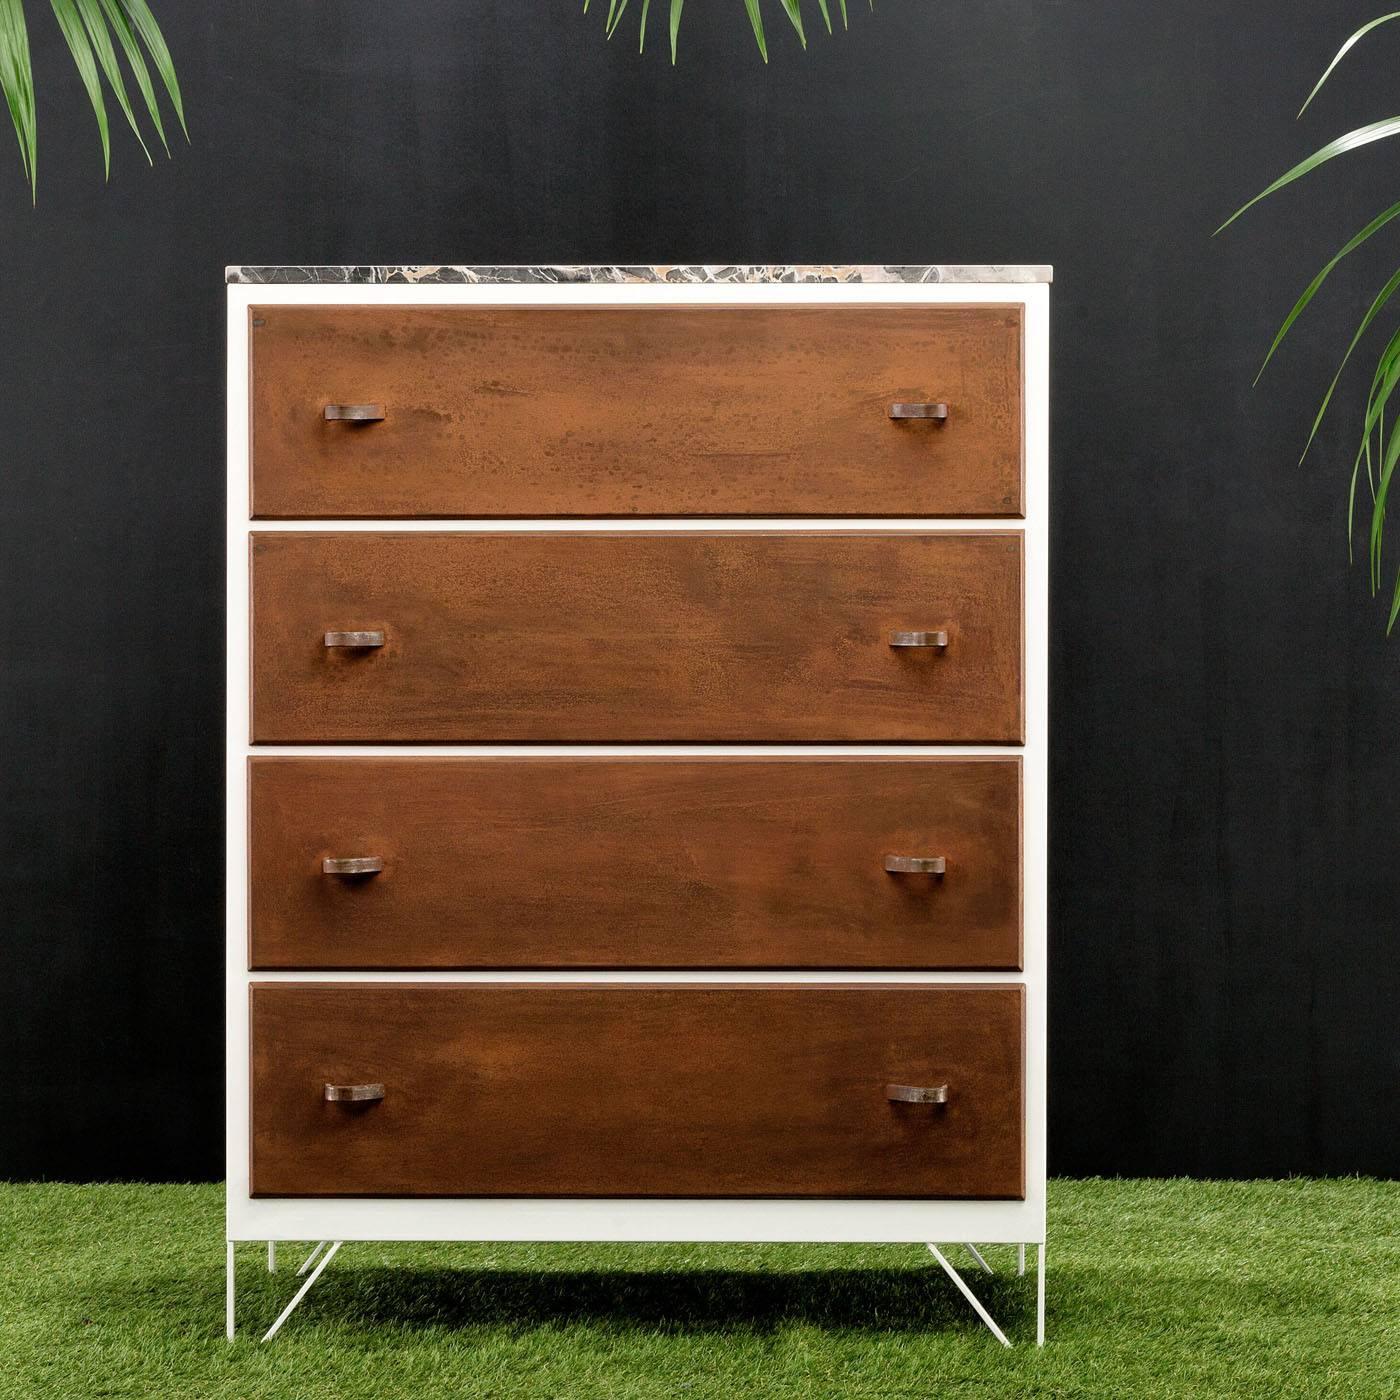 This piece is a contemporary reinterpretation of a grandmother's dresser. The marble top and retro flavor create an antique elegant allure. The steel finish or the structure strikingly contrast with the surface of the marble and the texture of the